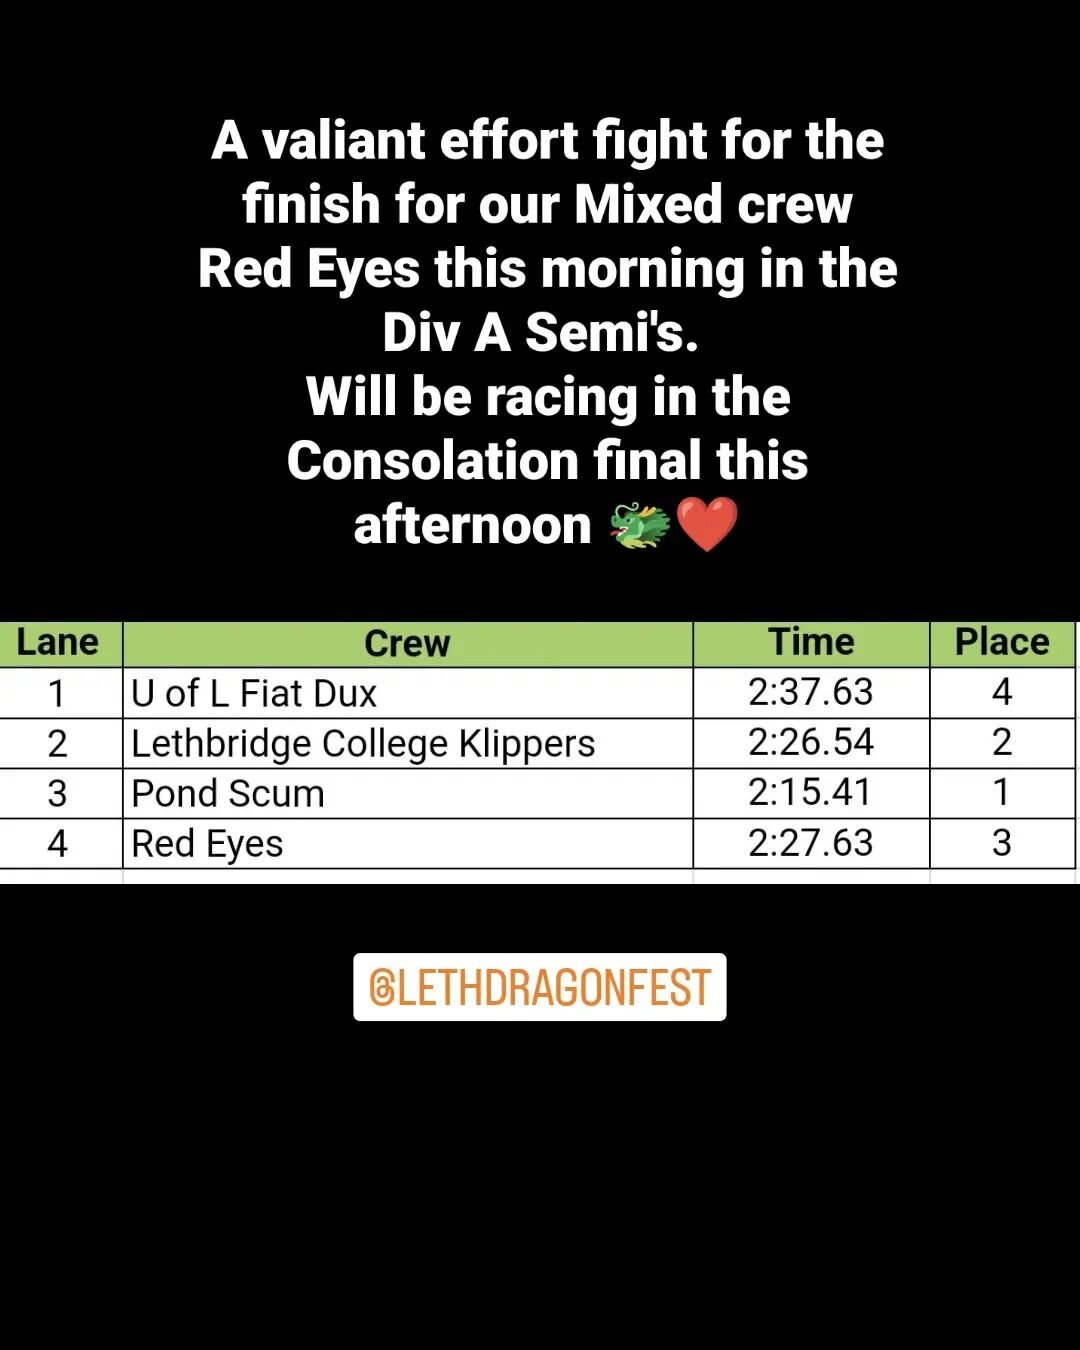 Mixed team Red Eyes made a valiant effort in the morning Div A Semi-finals. Going to be racing in the Consolation Finals, come cheer us on! 🐲❤️
.
.
#redeyesdragonboat #lethdragonfest22 #lethdragonfest #strongertogether #paddlesupyyc #yycdbs